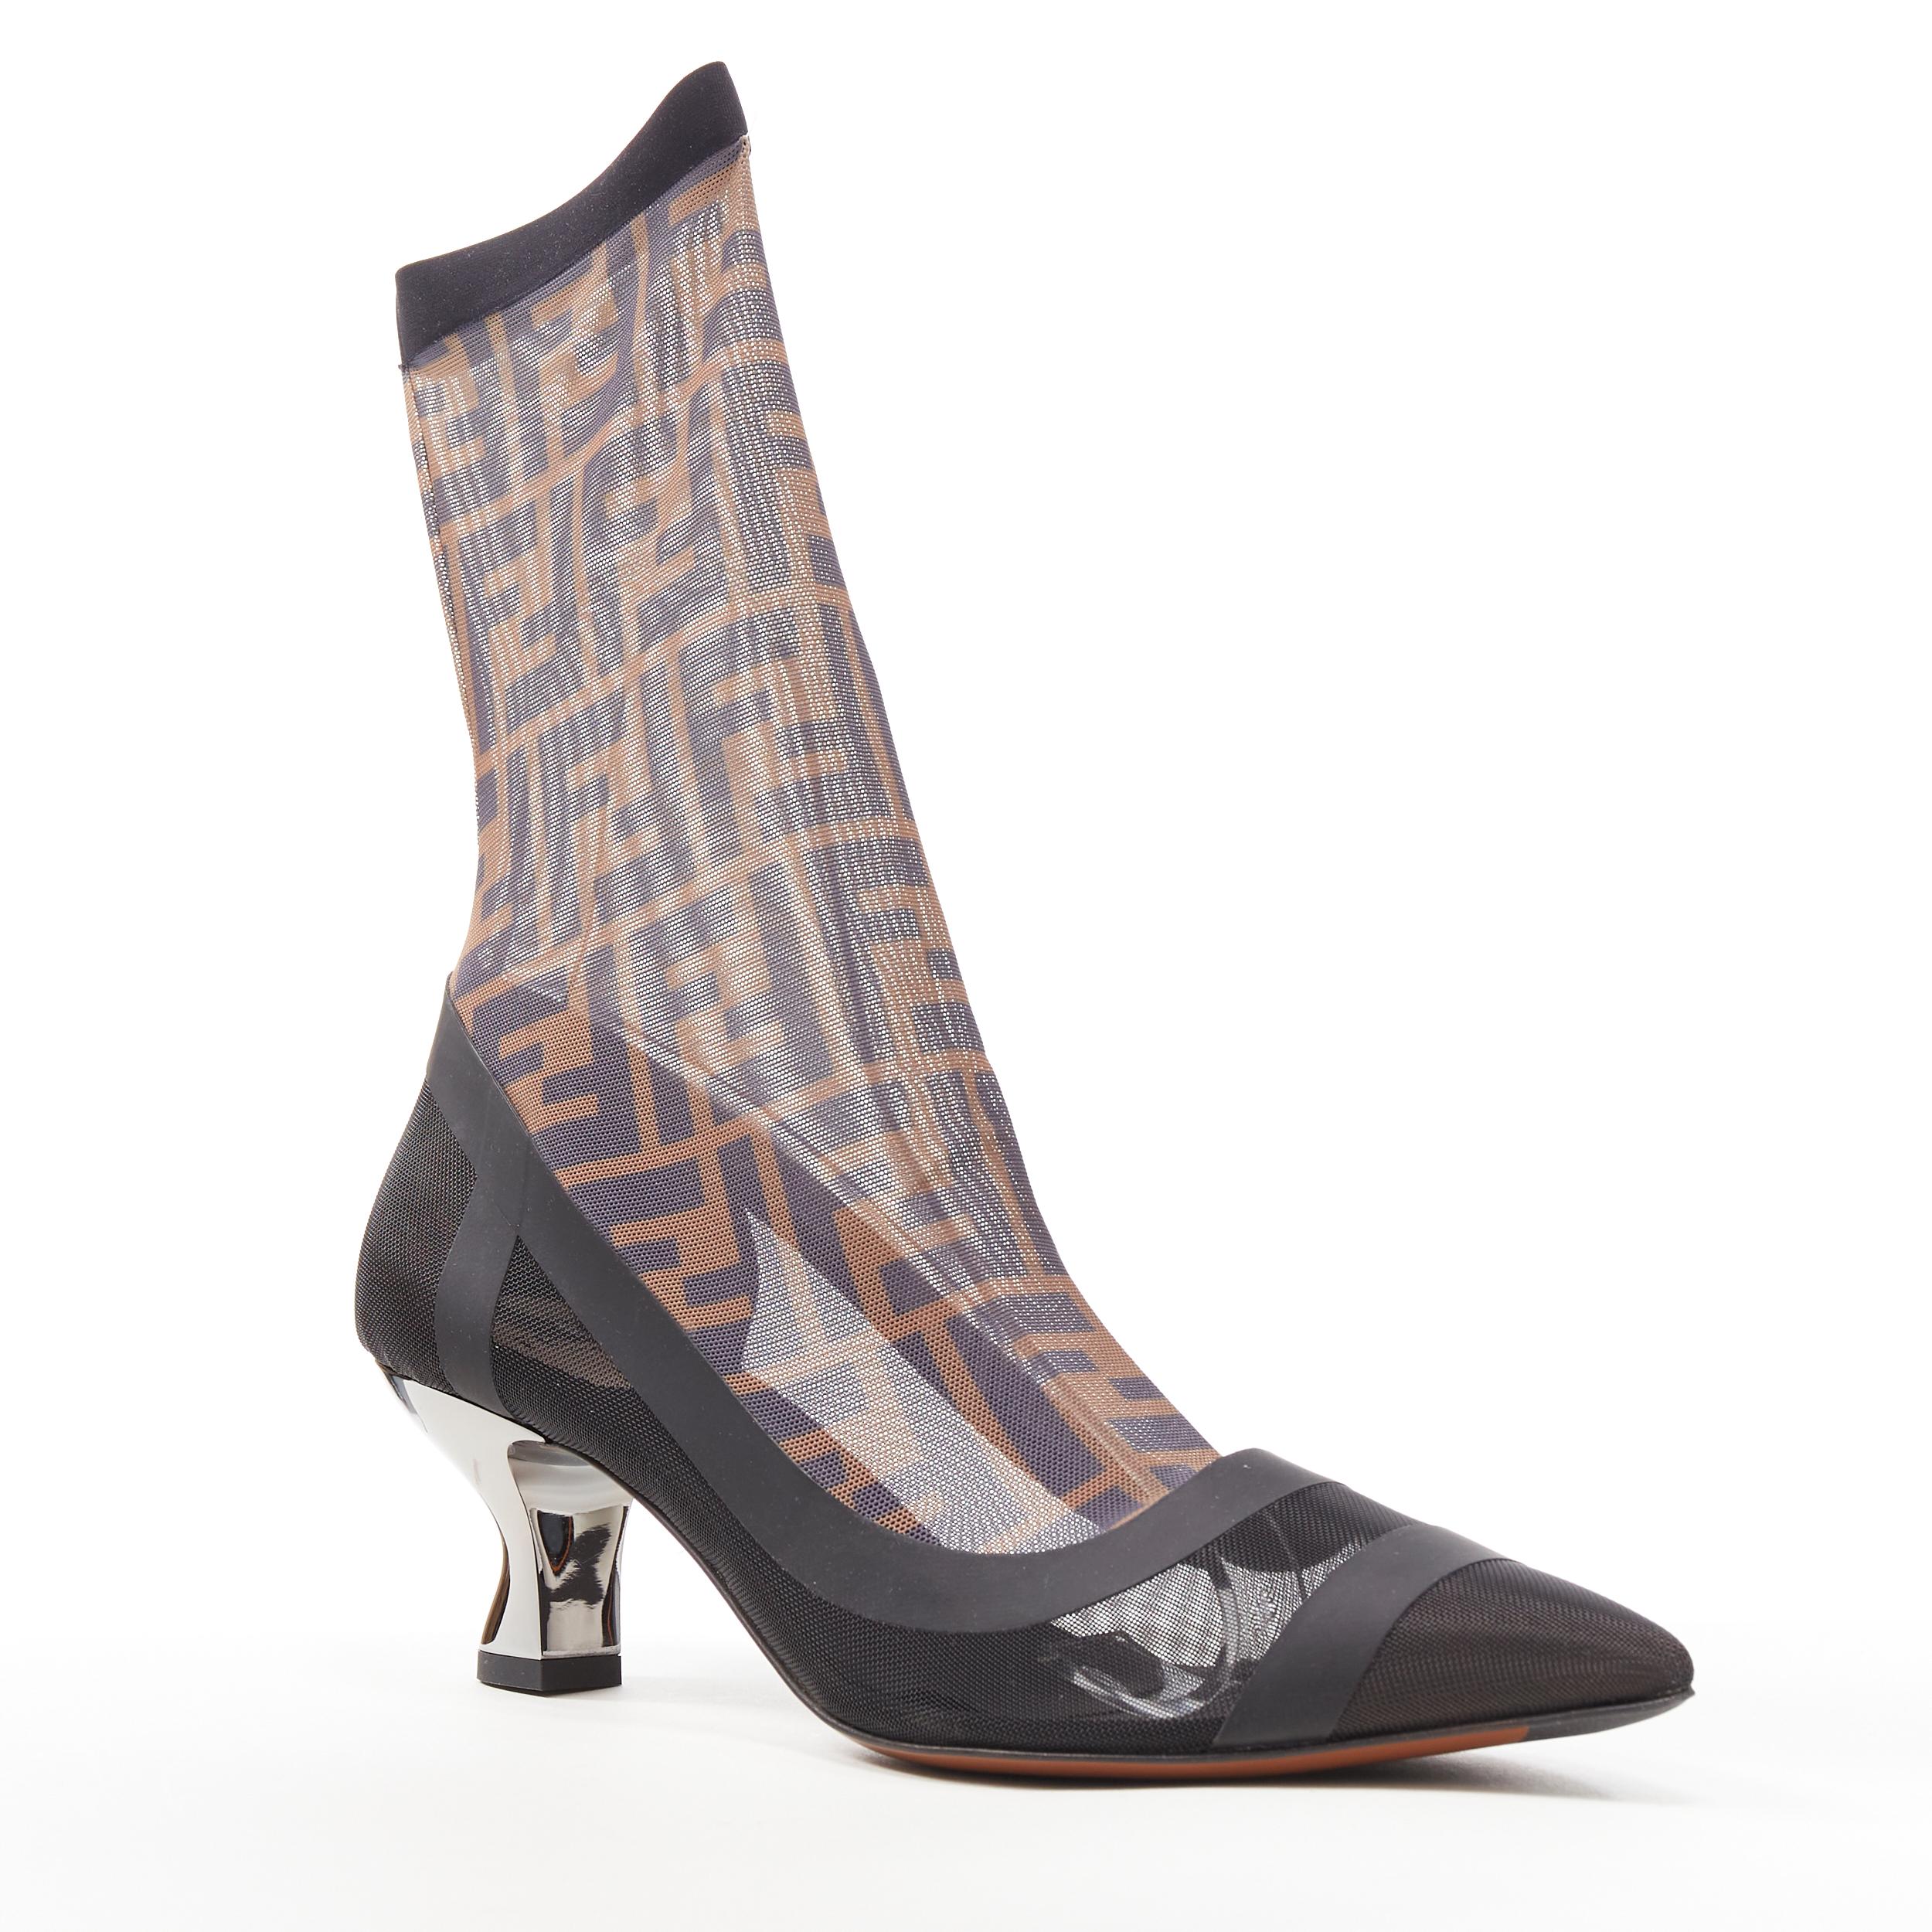 new FENDI FF Zucca monogram sheer sock black kitten heel bootie pump EU39 
Reference: TGAS/B00360 
Brand: Fendi 
Material: Fabric 
Color: Brown 
Pattern: Other 
Extra Detail: Sheer sock knit upper. Rubberized trimming. Silver metallic curved kitten